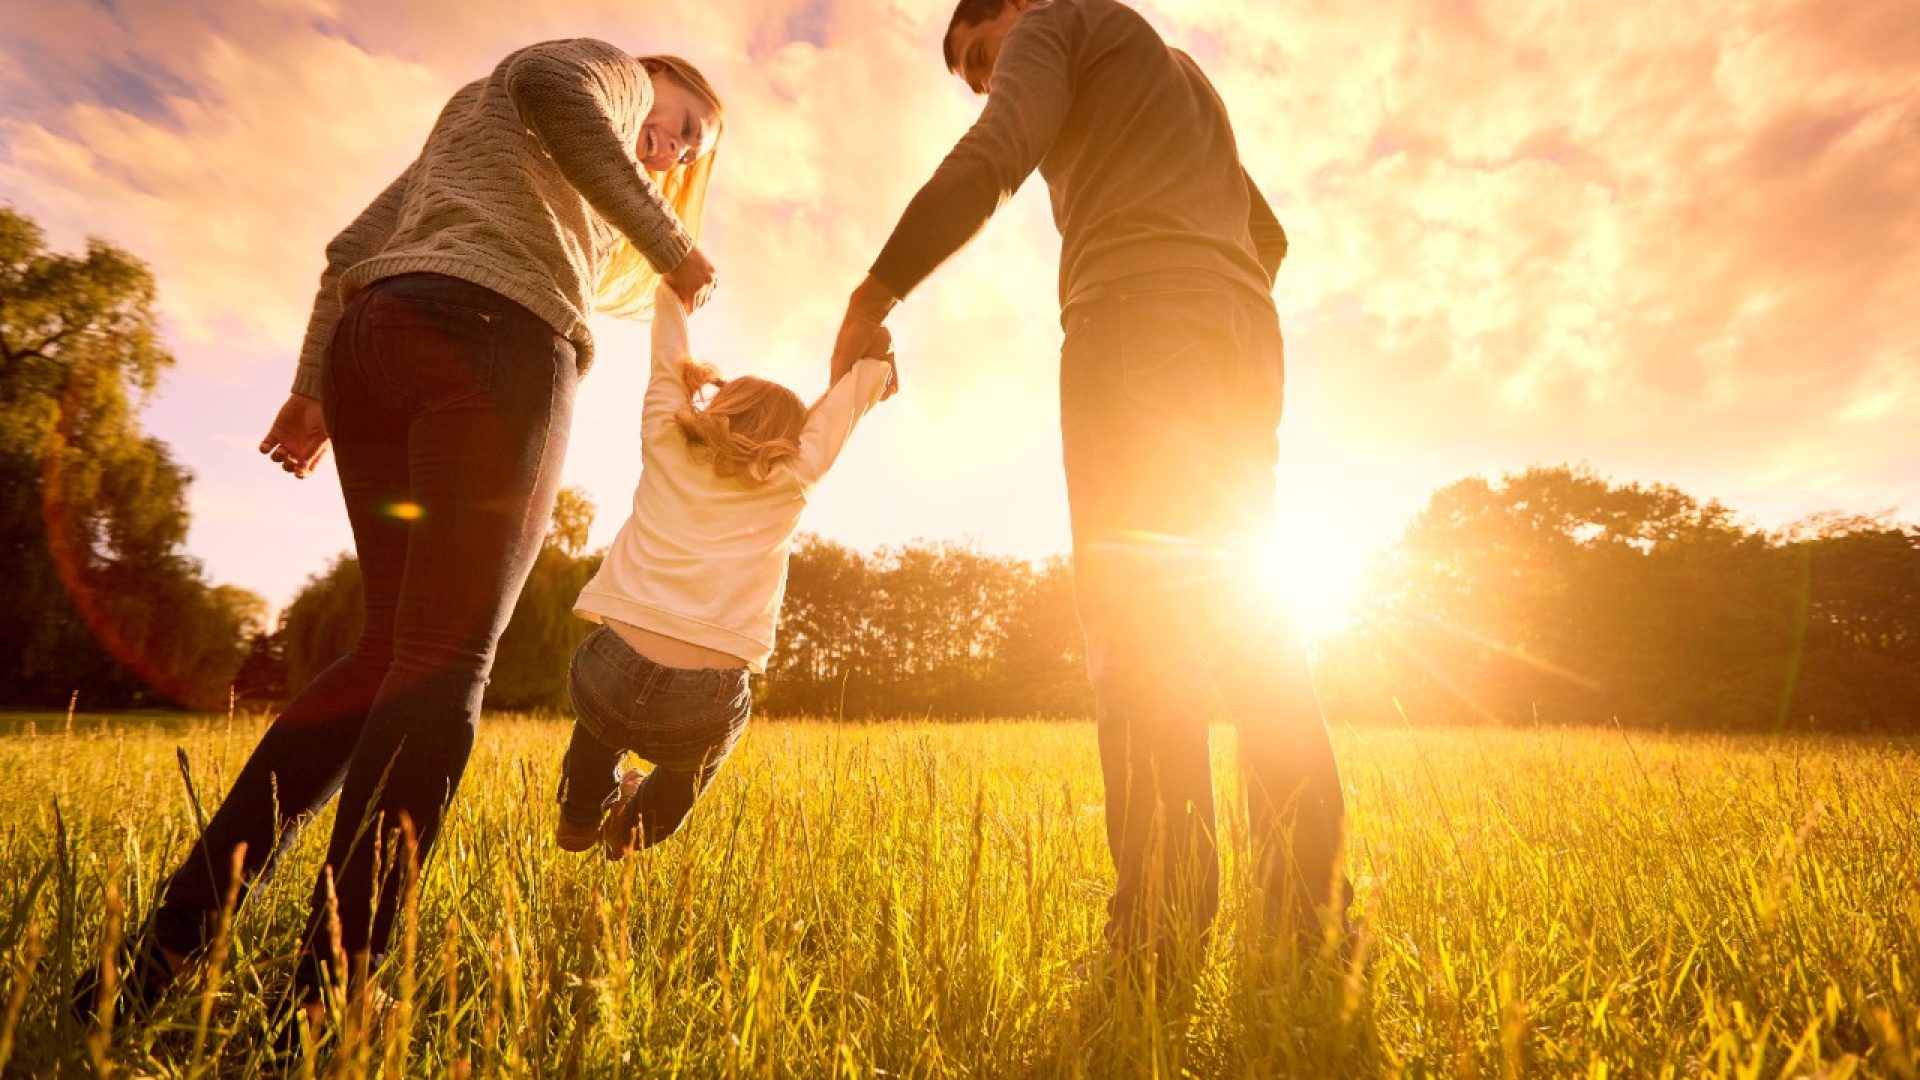 Parents hold the baby's hands.  Happy family in the park evening light. The lights of a sun. Mom, dad and baby happy walk at sunset. The concept of a happy family.